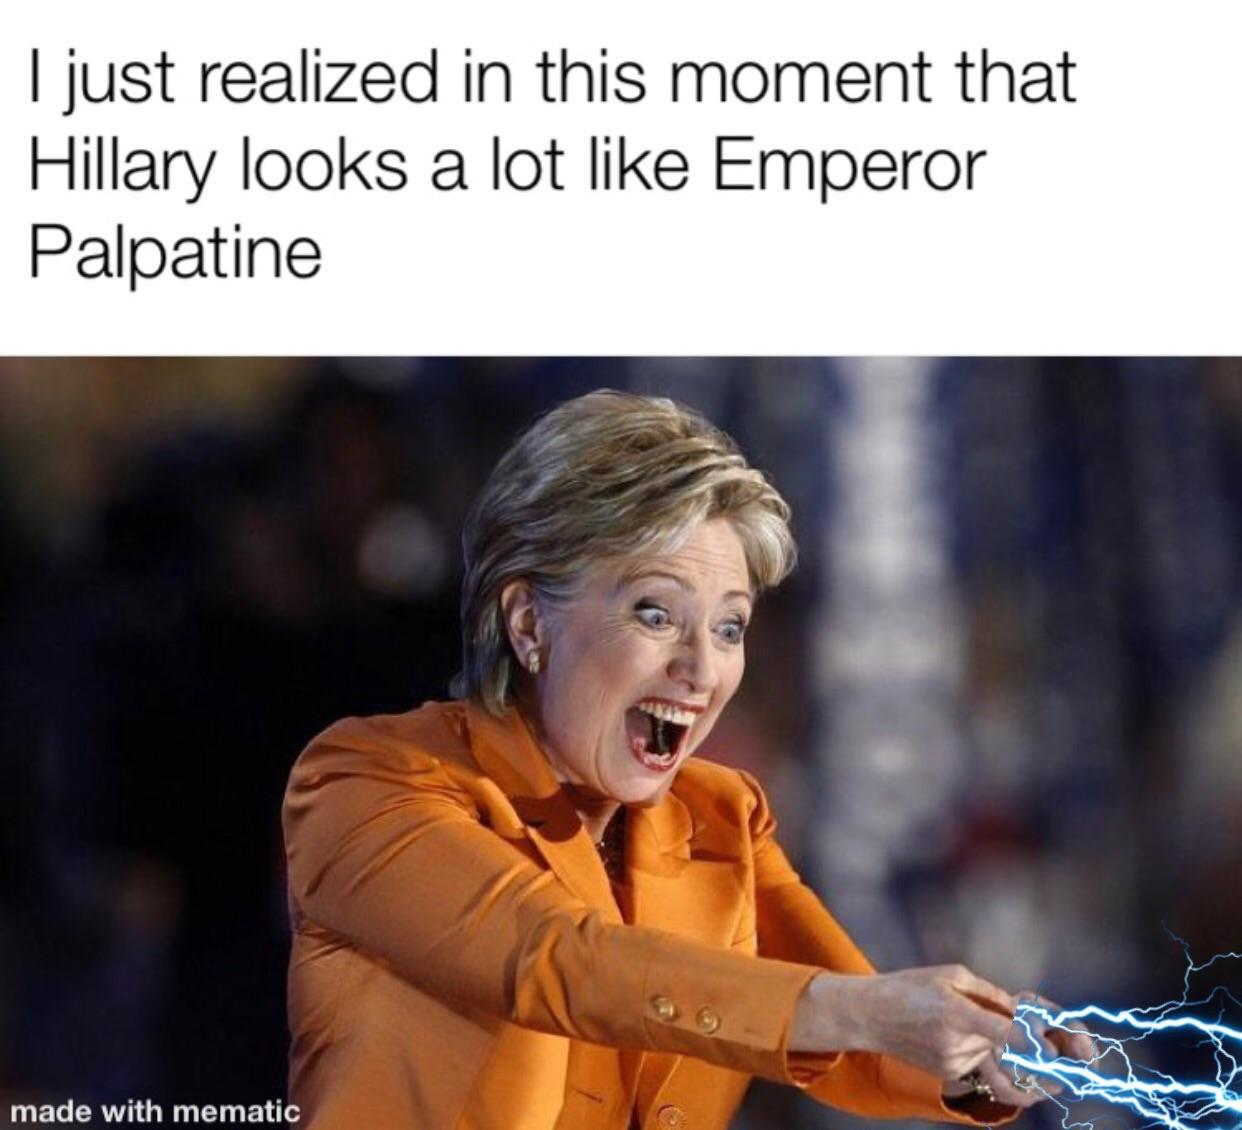 dumb memes - I just realized in this moment that Hillary looks a lot Emperor Palpatine made with mematic